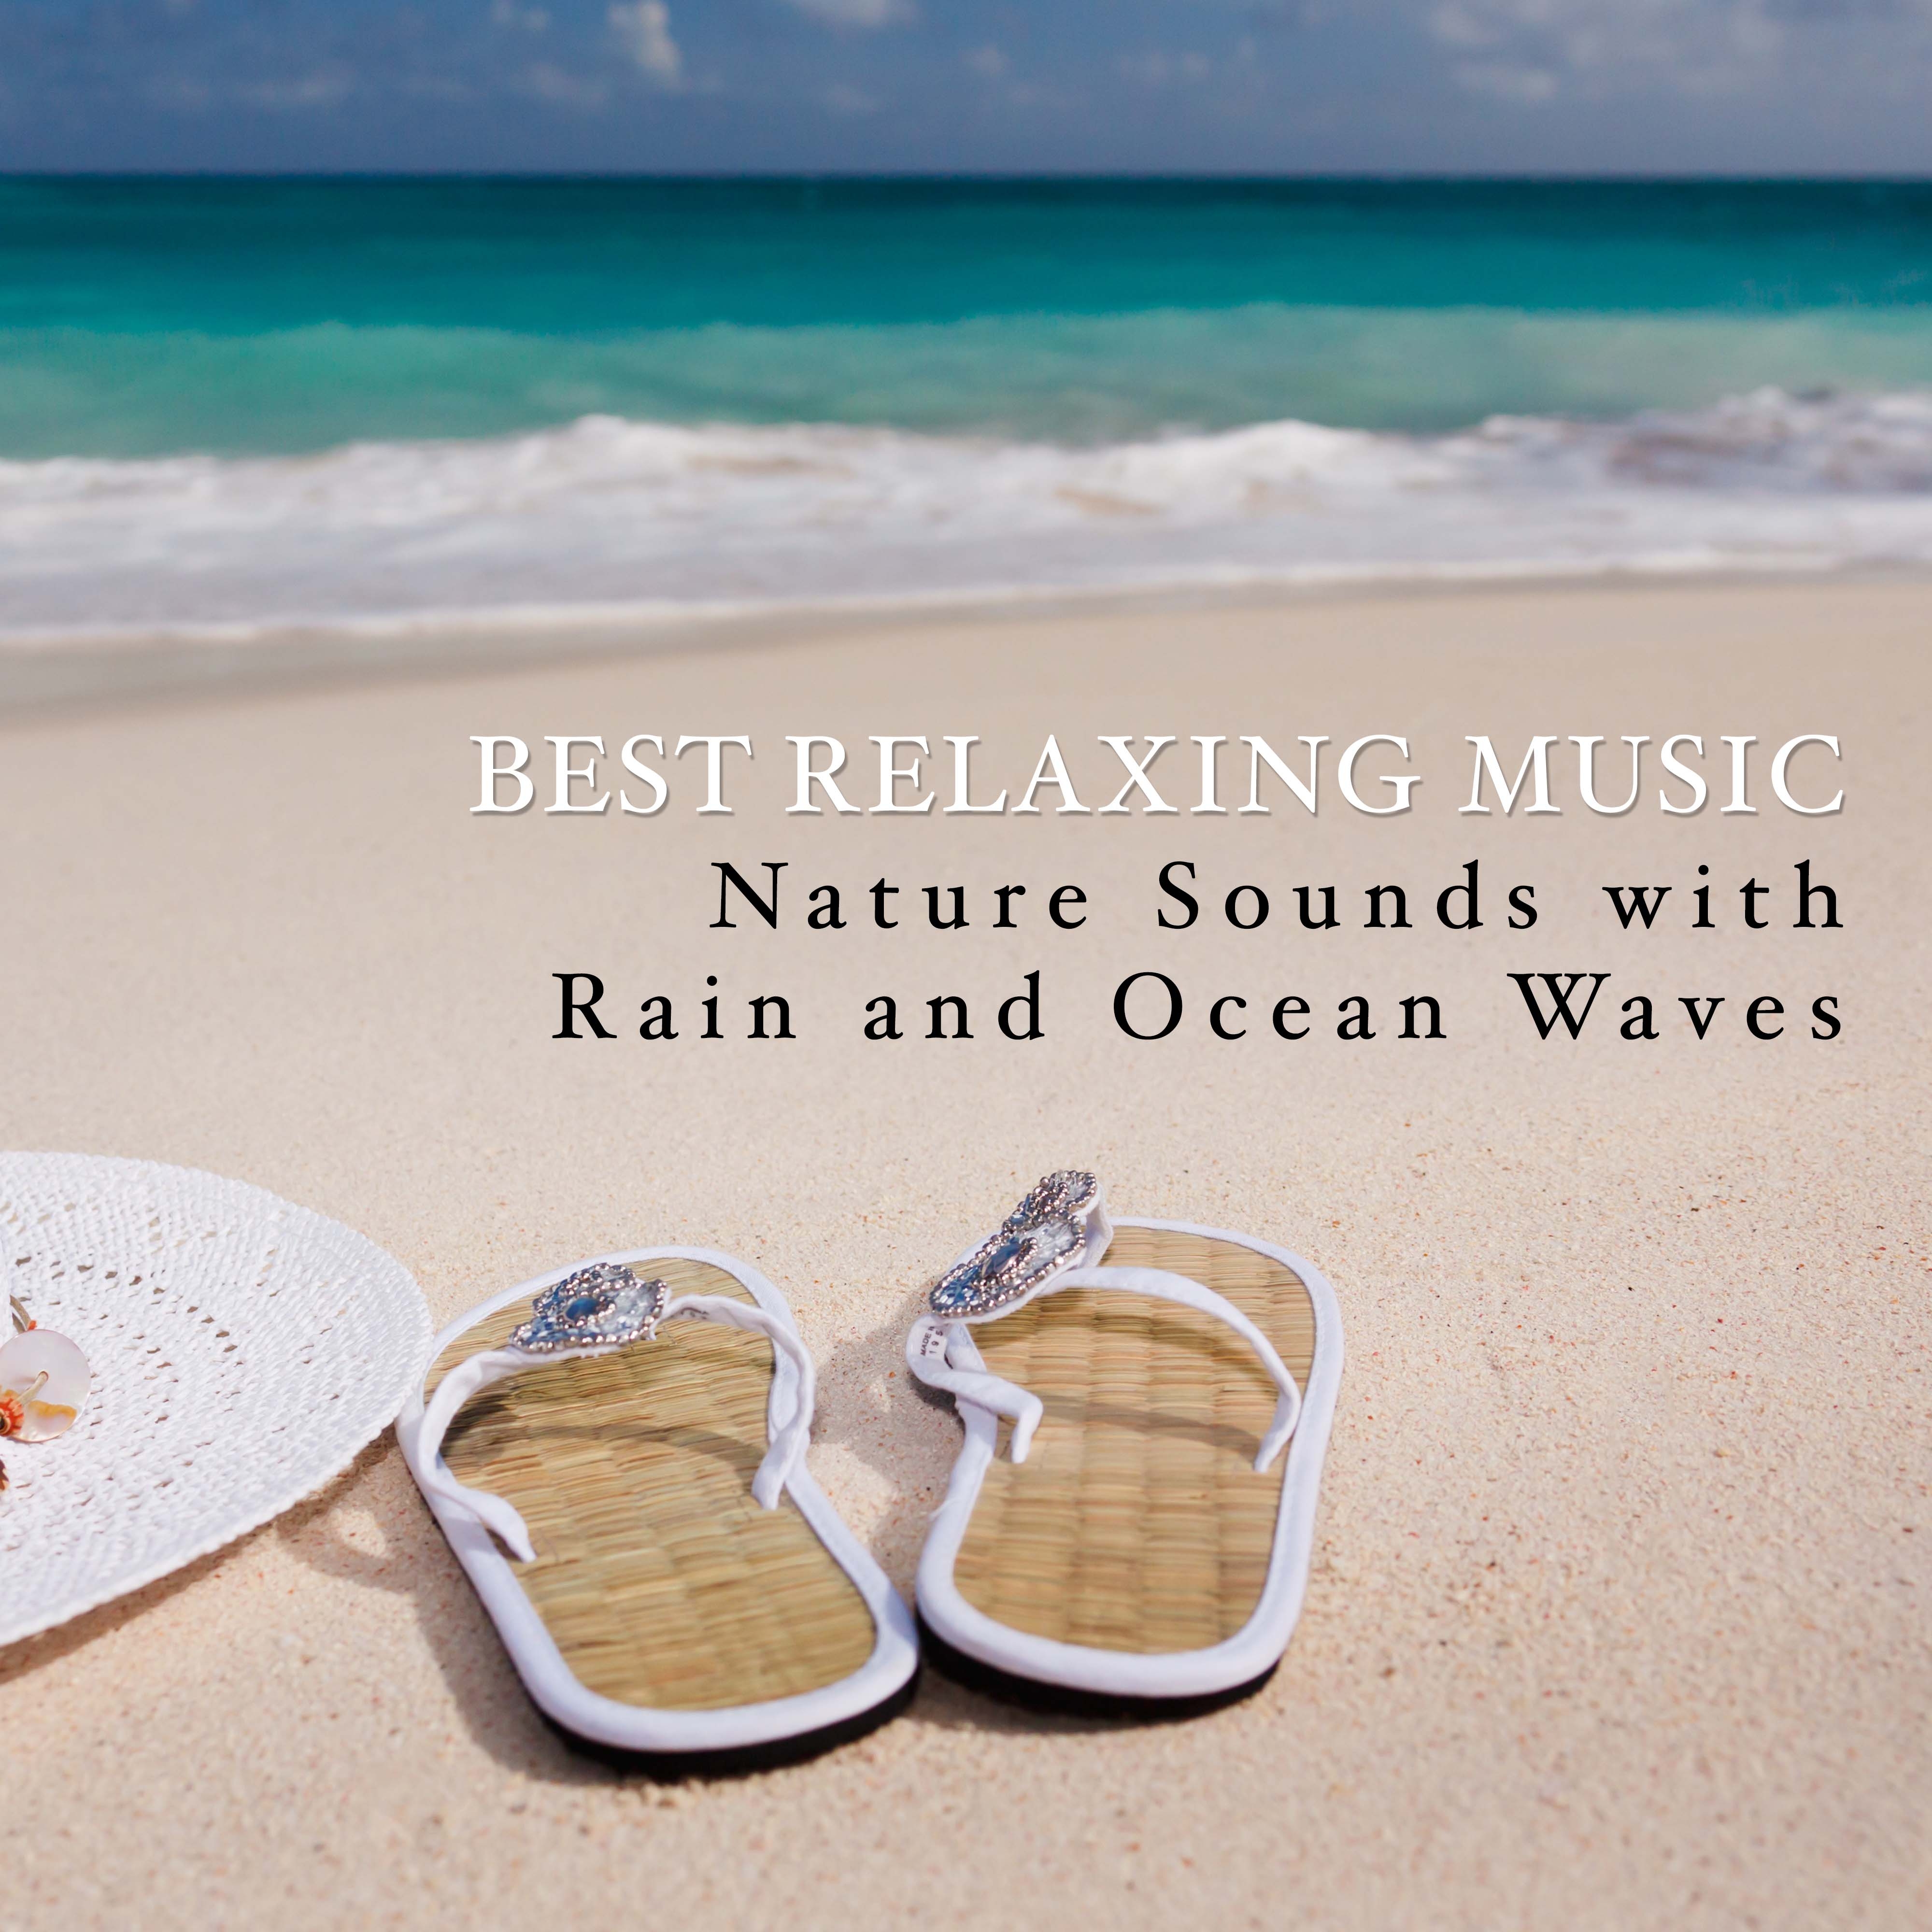 Best Relaxing Music - Nature Sounds with Rain and Ocean Waves